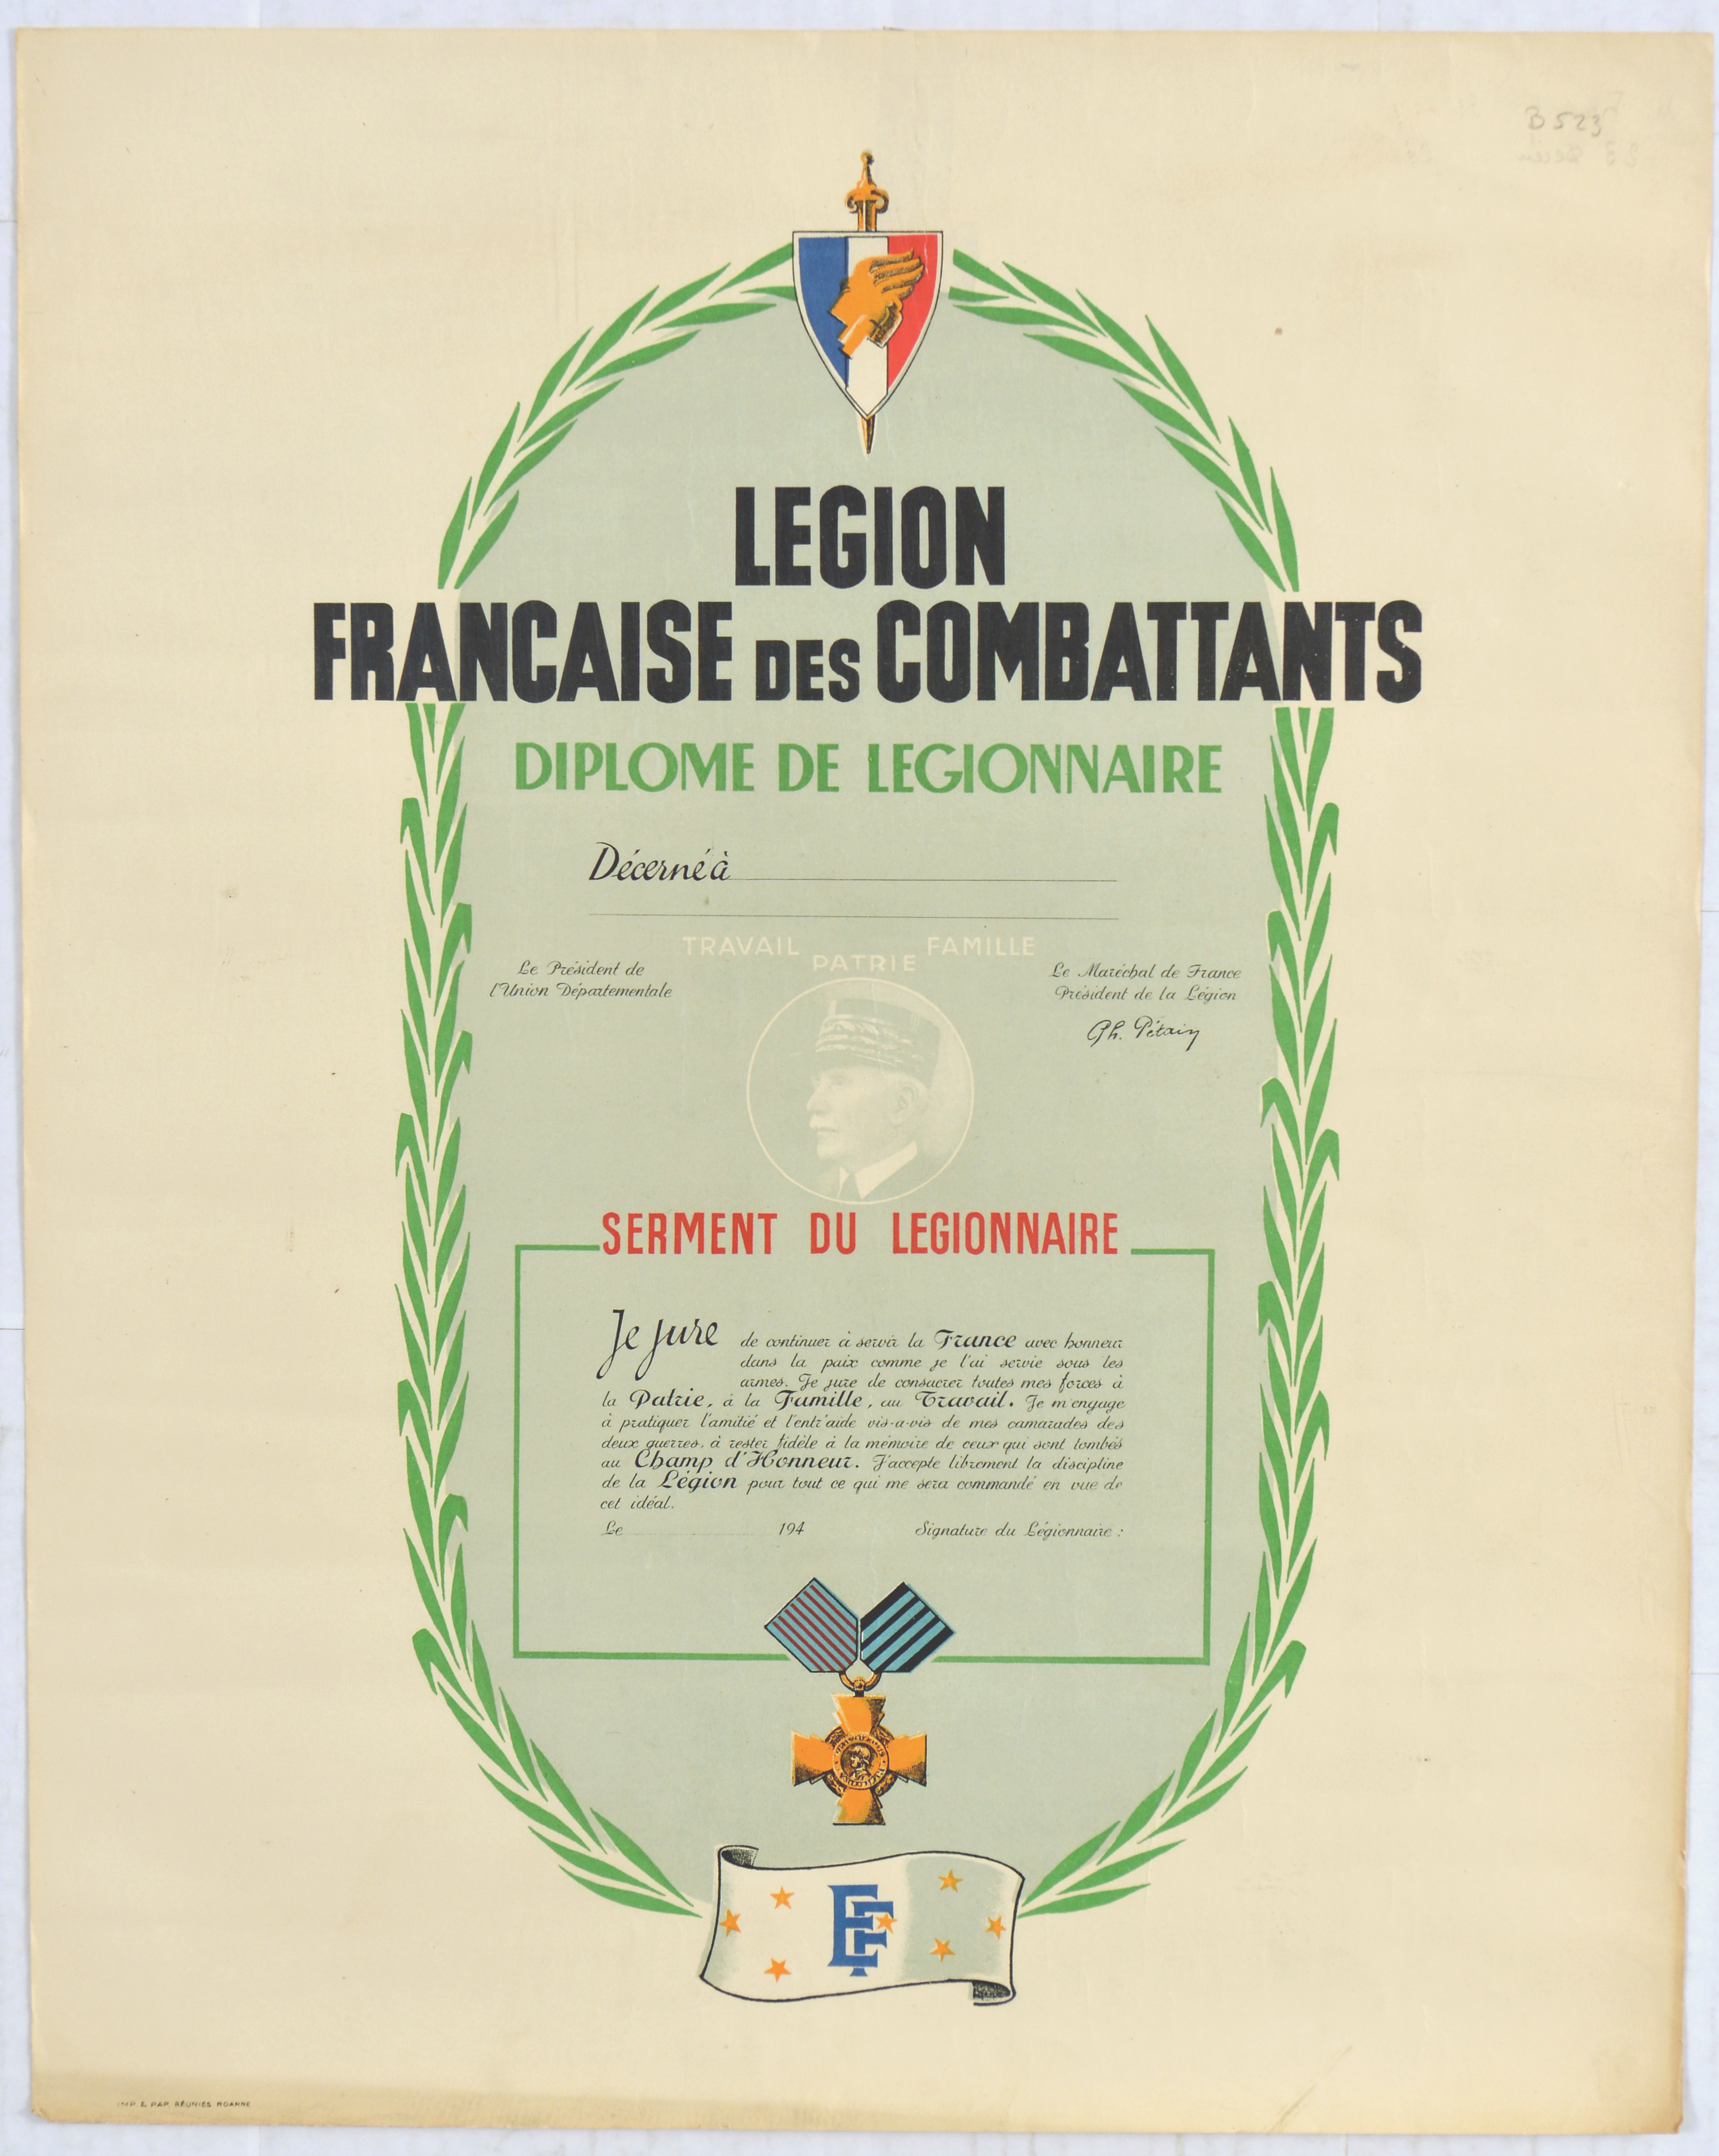 War Poster French Legion Combattants WWII Vichy Petain